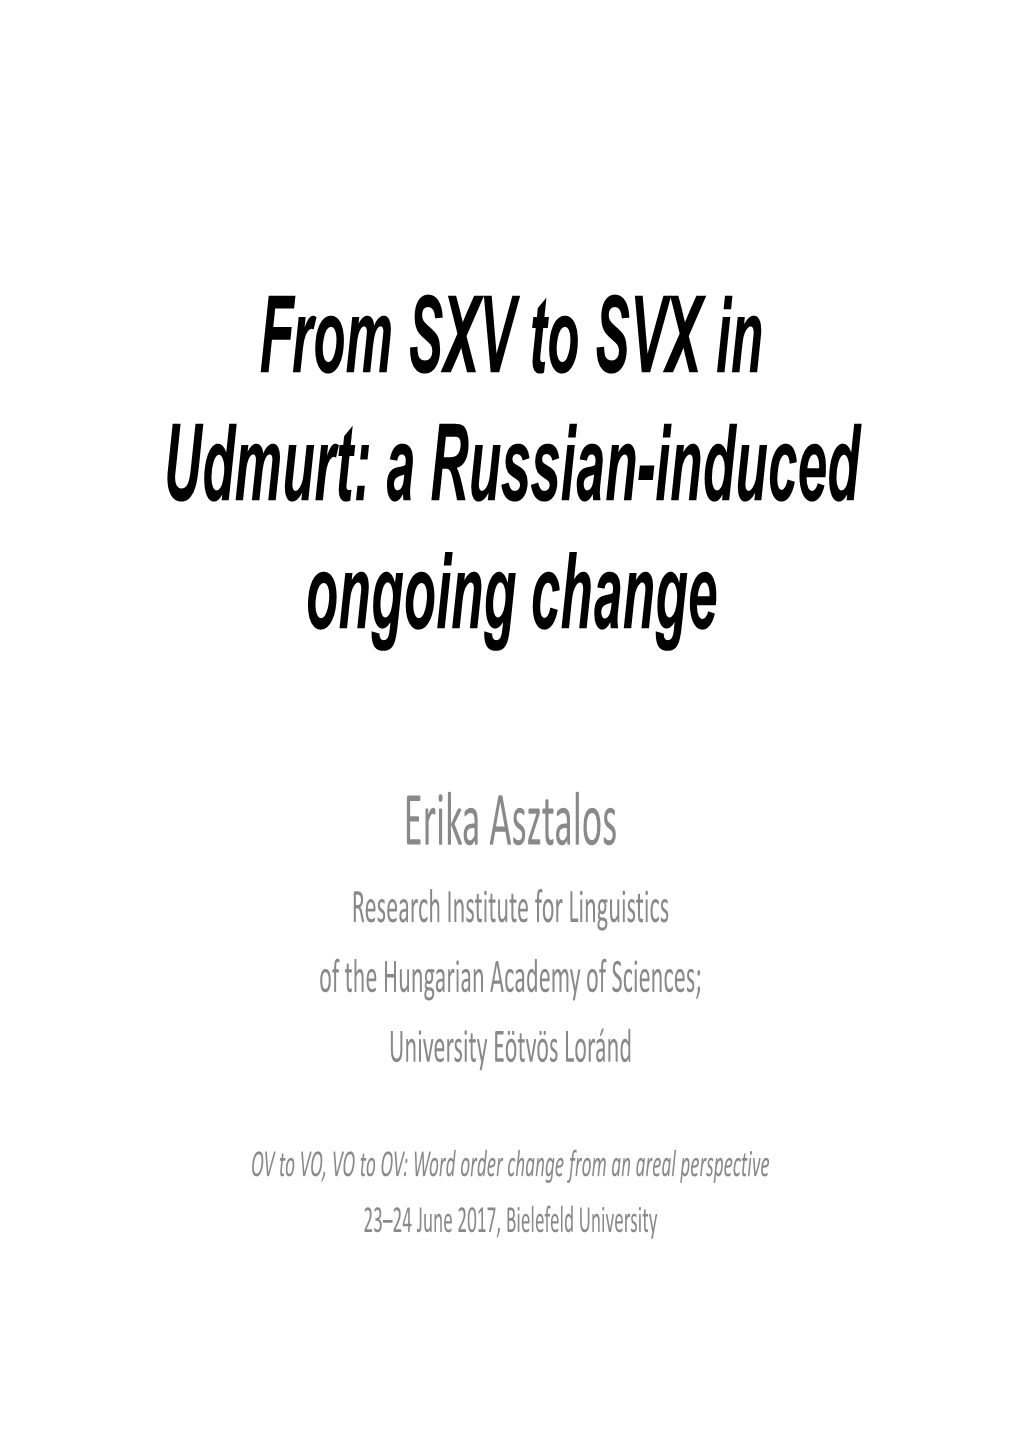 From SXV to SVX in Udmurt: a Russian-Induced Ongoing Change